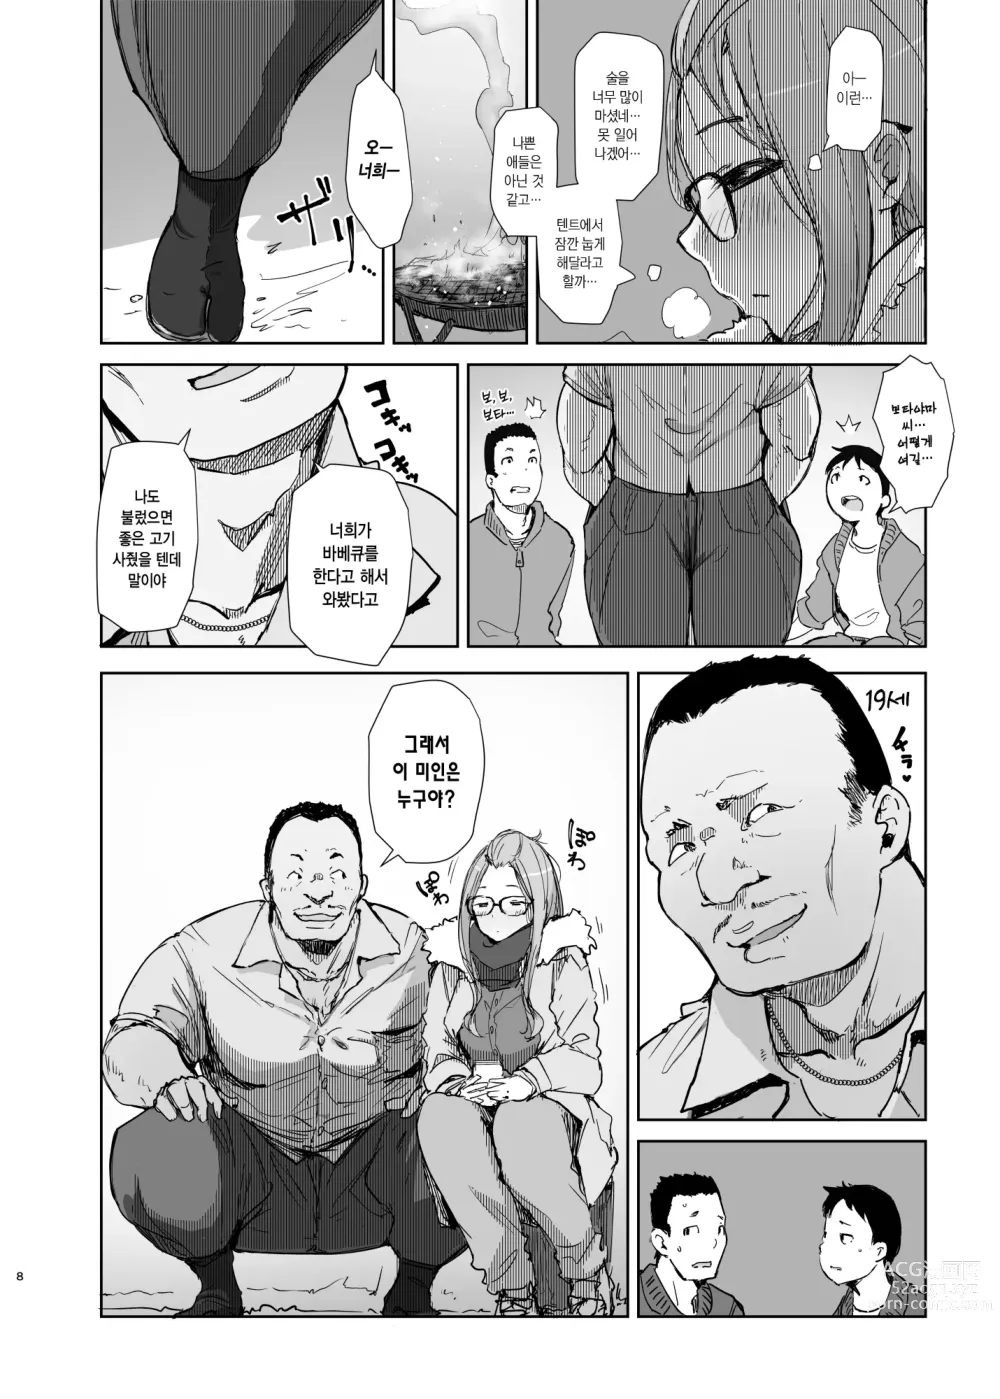 Page 7 of doujinshi 사쿠라캠